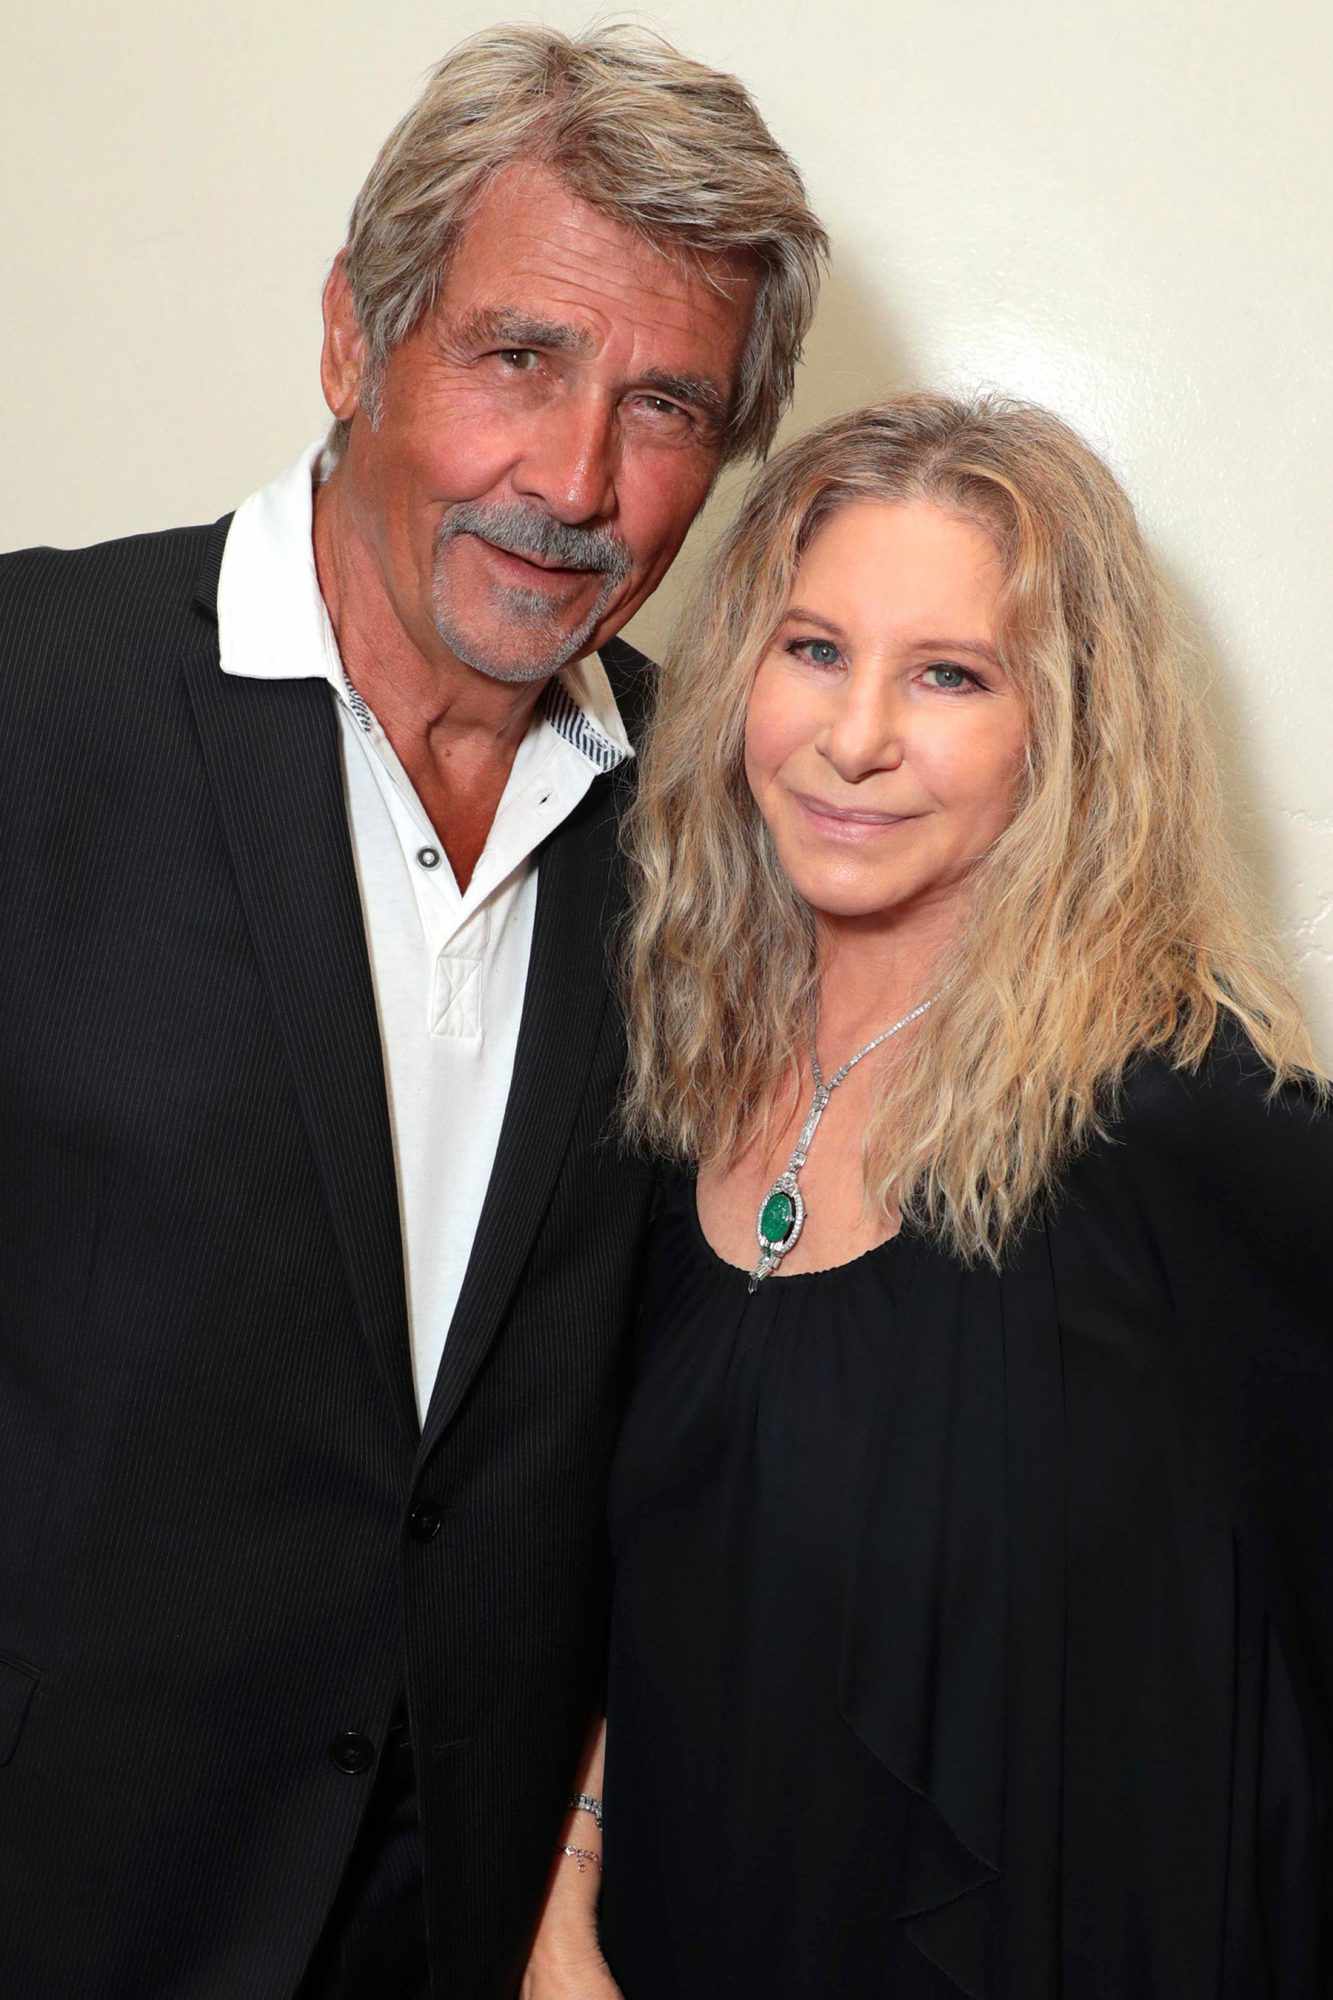 who is barbara streisand married to , who is the ugliest man in the world